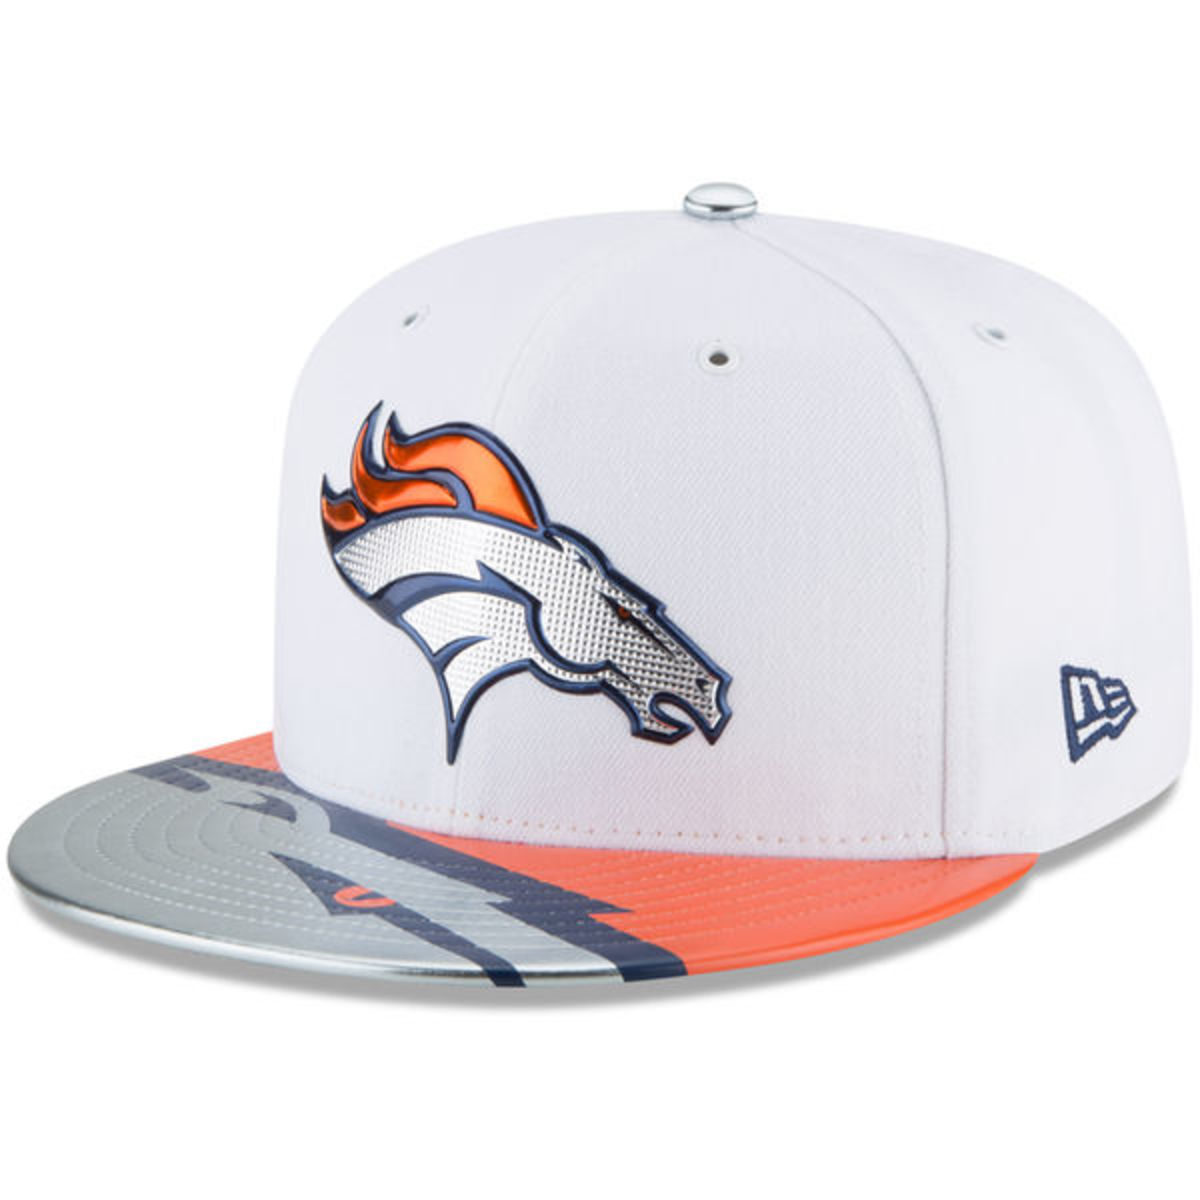 Power ranking the top 10 Detroit Lions NFL Draft hats of the last